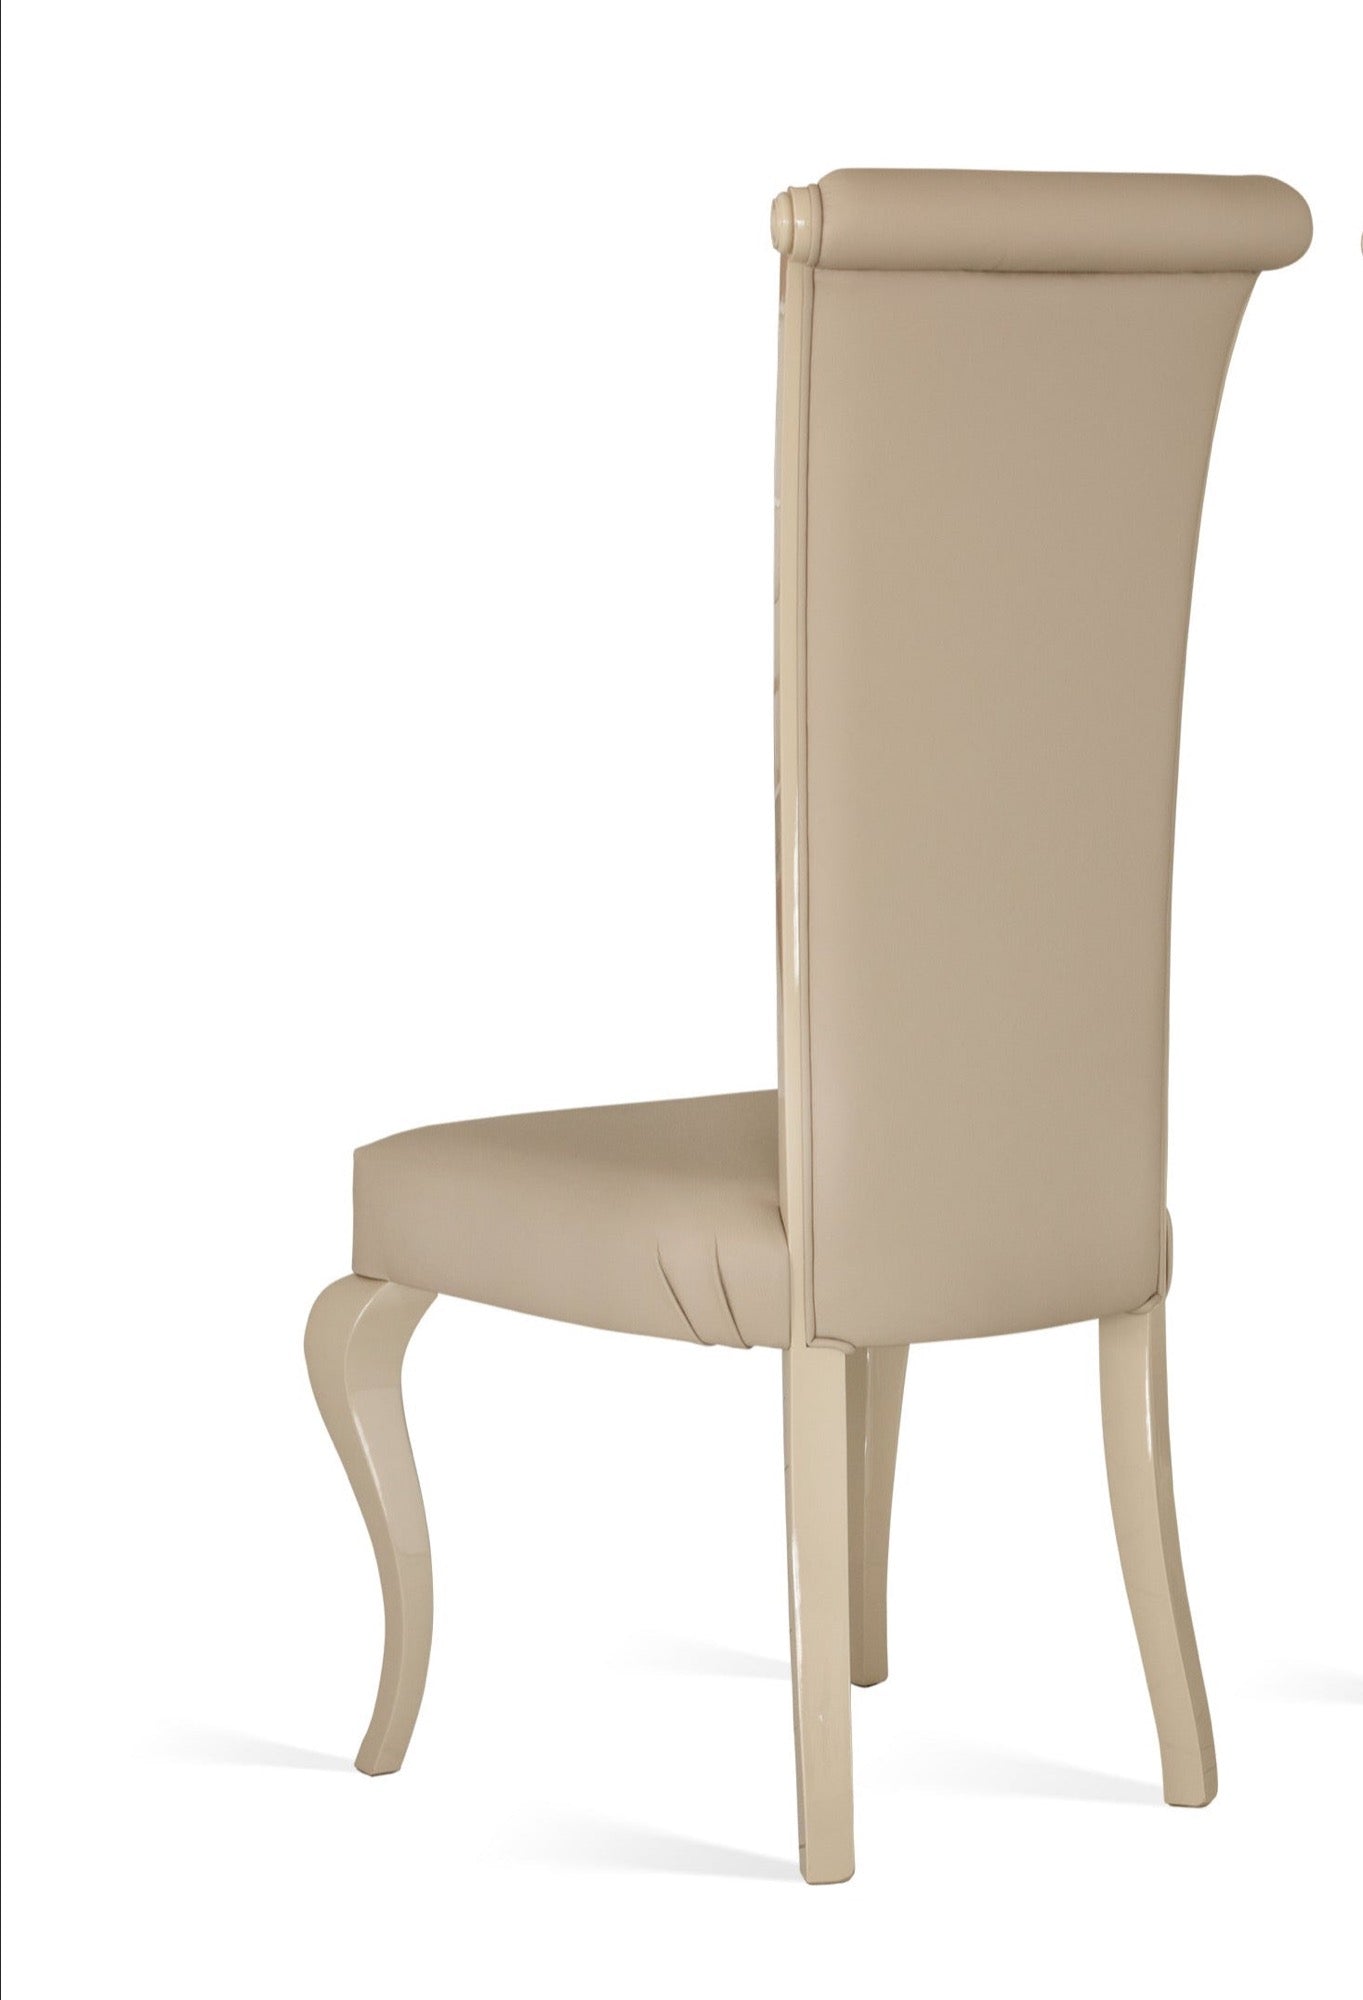 High Back Dining chair in beige leather